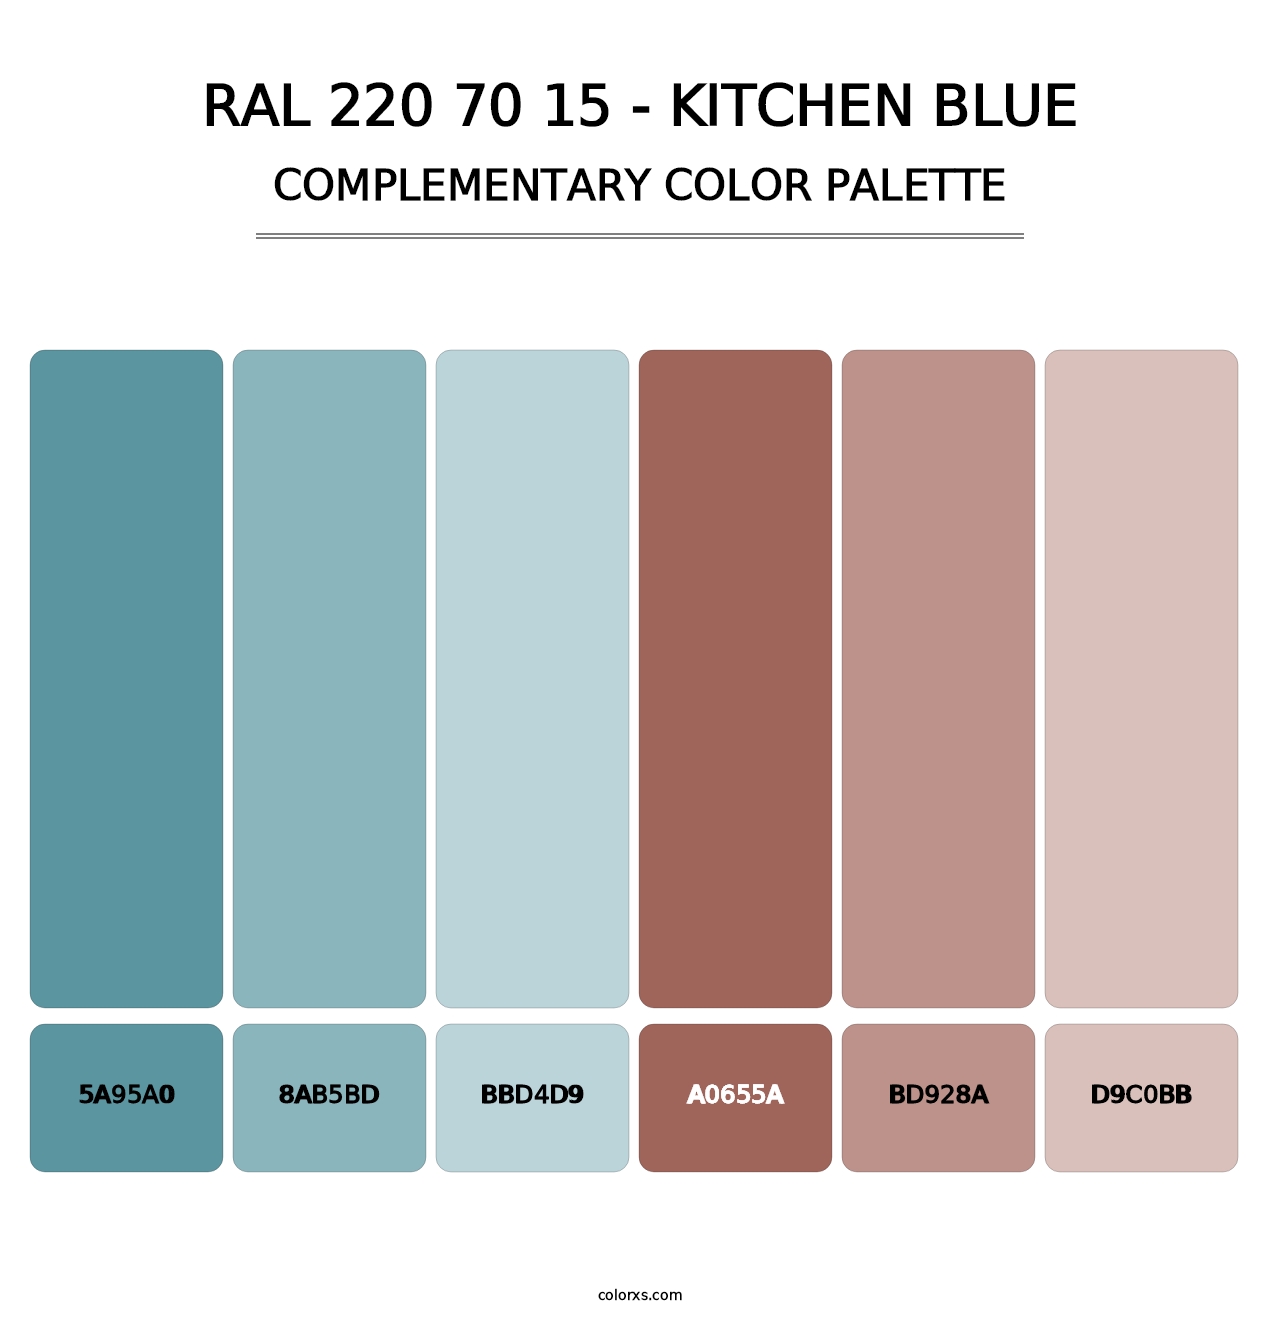 RAL 220 70 15 - Kitchen Blue - Complementary Color Palette